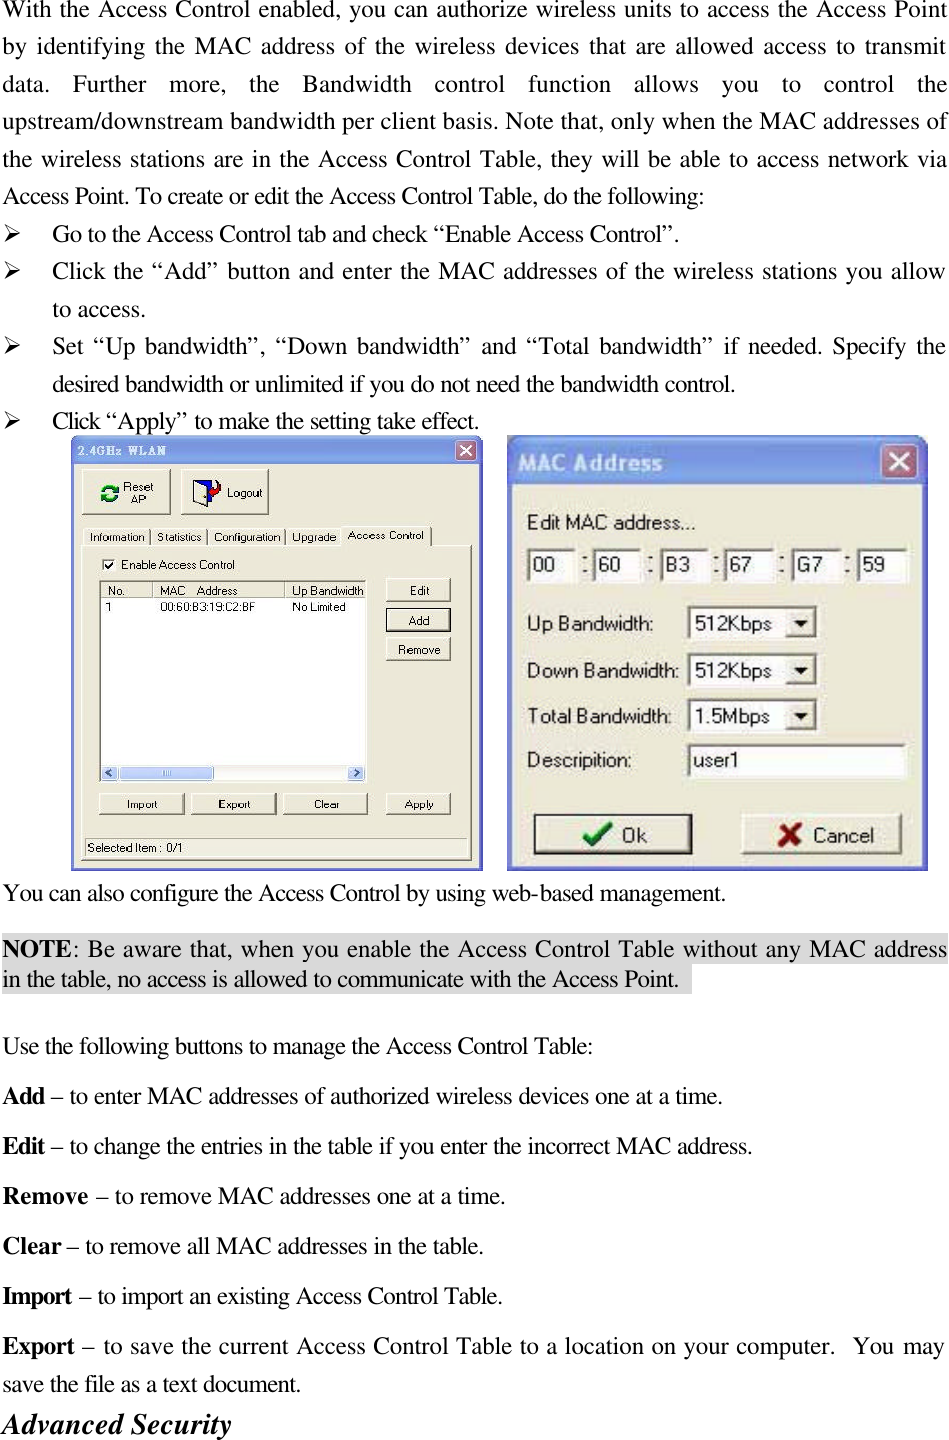 With the Access Control enabled, you can authorize wireless units to access the Access Point by identifying the MAC address of the wireless devices that are allowed access to transmit data. Further more, the Bandwidth control function allows you to control the upstream/downstream bandwidth per client basis. Note that, only when the MAC addresses of the wireless stations are in the Access Control Table, they will be able to access network via Access Point. To create or edit the Access Control Table, do the following:   Ø Go to the Access Control tab and check “Enable Access Control”.   Ø Click the “Add” button and enter the MAC addresses of the wireless stations you allow to access.   Ø Set “Up bandwidth”, “Down bandwidth” and “Total bandwidth” if needed. Specify the desired bandwidth or unlimited if you do not need the bandwidth control.   Ø Click “Apply” to make the setting take effect.        You can also configure the Access Control by using web-based management.    NOTE: Be aware that, when you enable the Access Control Table without any MAC address in the table, no access is allowed to communicate with the Access Point.    Use the following buttons to manage the Access Control Table: Add – to enter MAC addresses of authorized wireless devices one at a time. Edit – to change the entries in the table if you enter the incorrect MAC address. Remove – to remove MAC addresses one at a time. Clear – to remove all MAC addresses in the table. Import – to import an existing Access Control Table. Export – to save the current Access Control Table to a location on your computer.  You may save the file as a text document. Advanced Security   